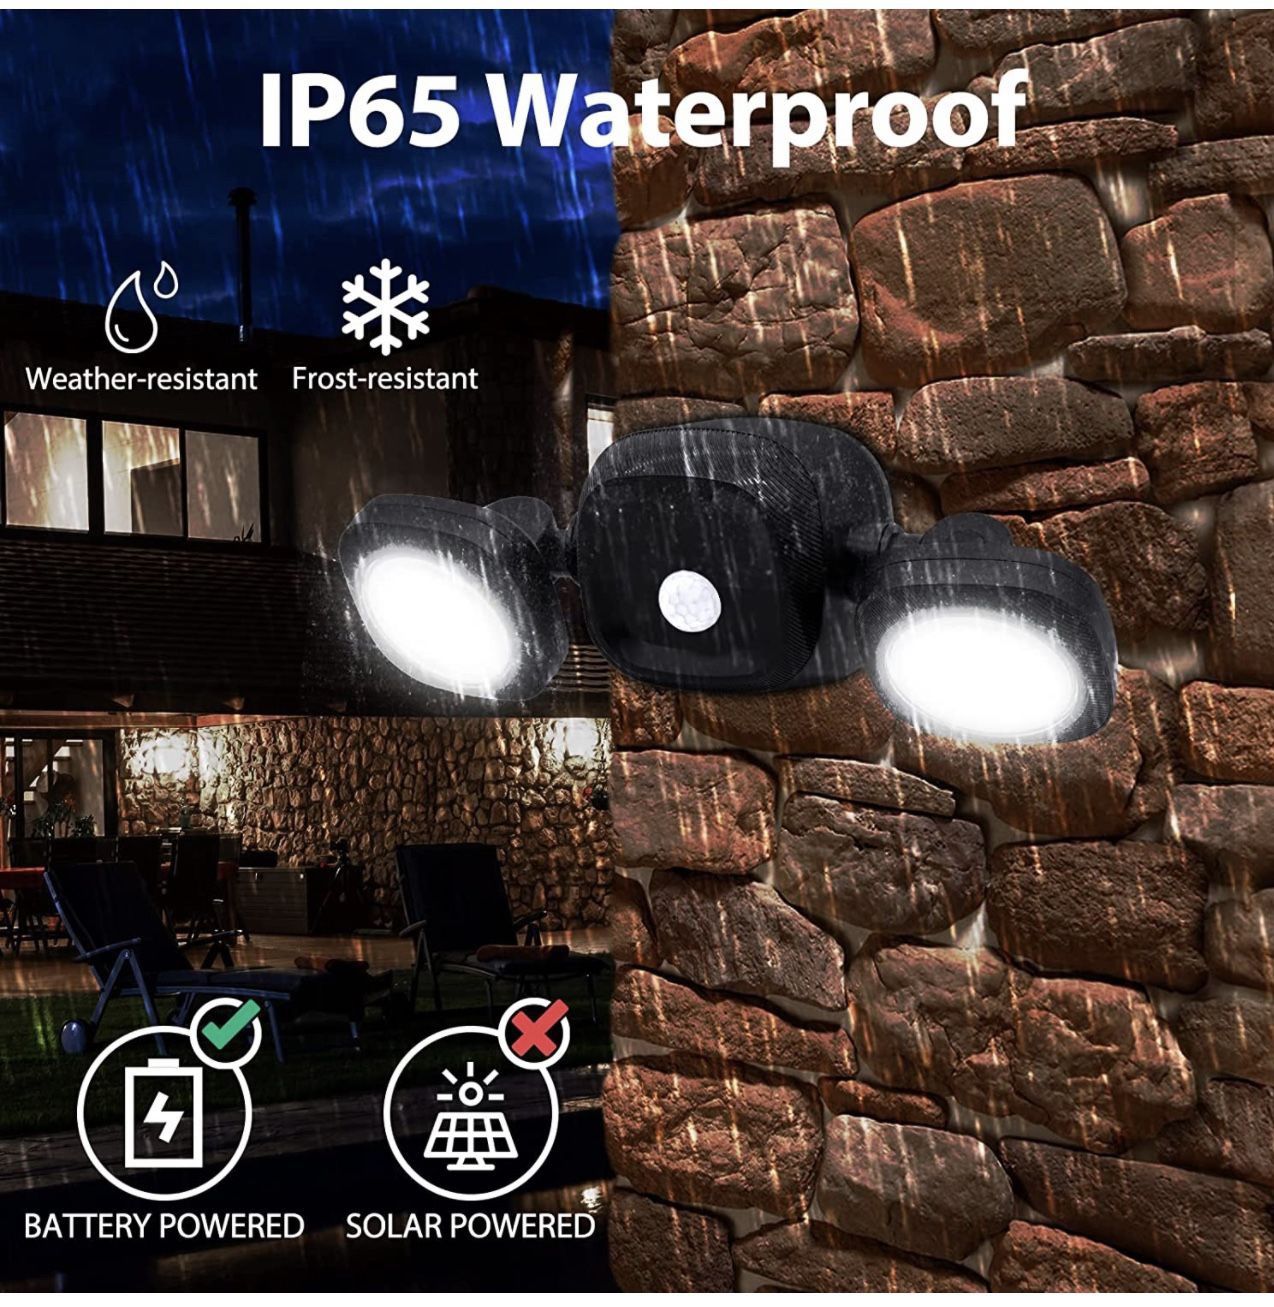 Motion Sensor LED Flood Lights Outdoor, Wireless Battery Operated Adjustable Dual Head Security Lights, Waterproof Spotlight with Motion Detector for 